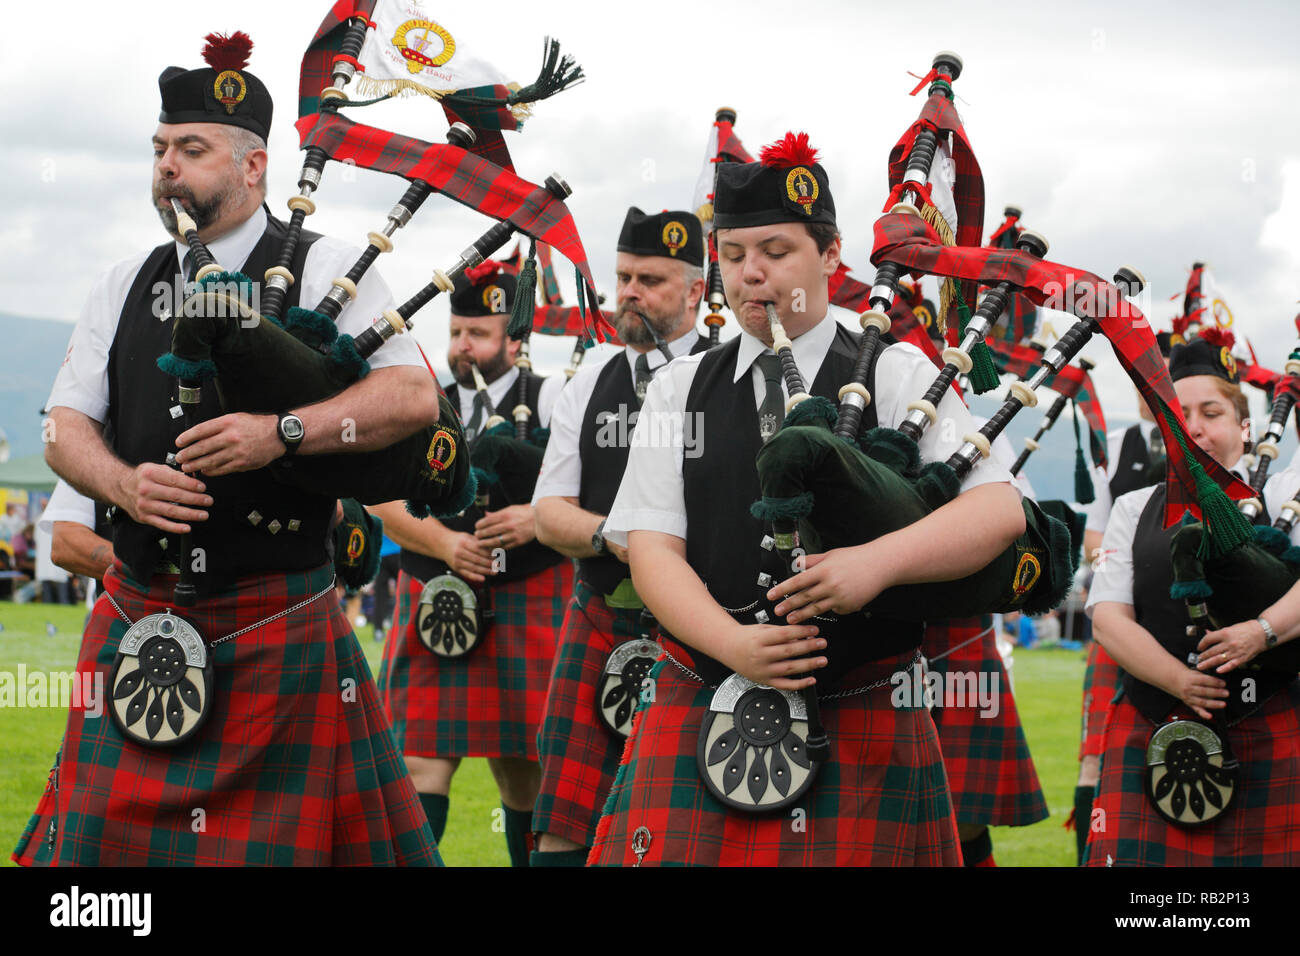 The Great Highland Bagpipe played at Highland games Stock Photo